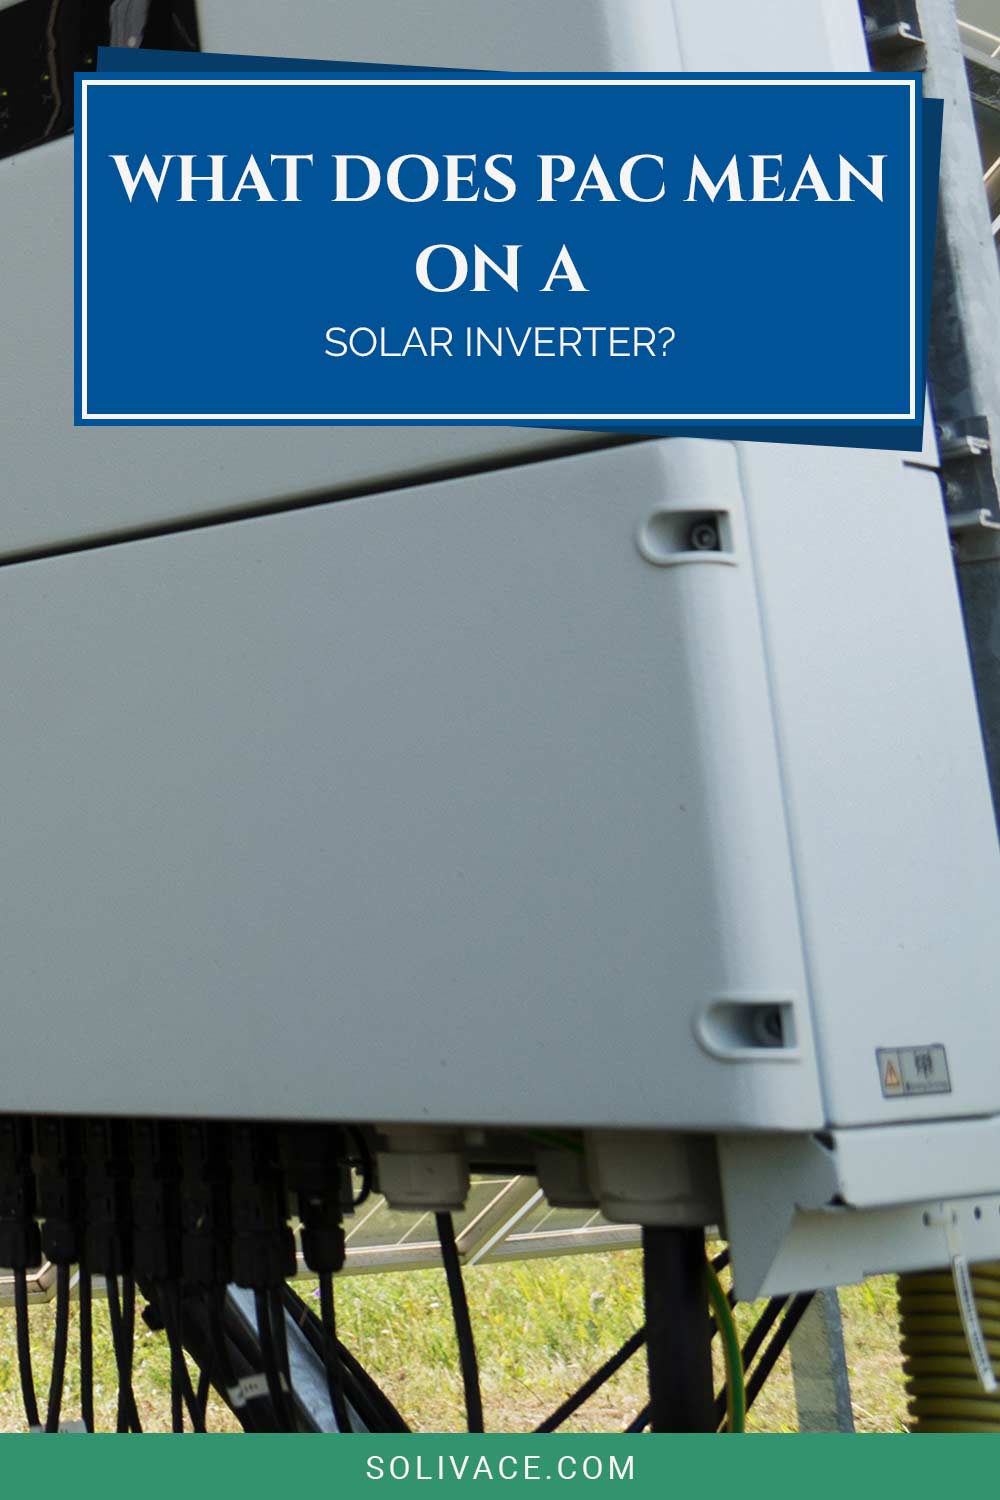 What Does PAC Mean On A Solar Inverter?